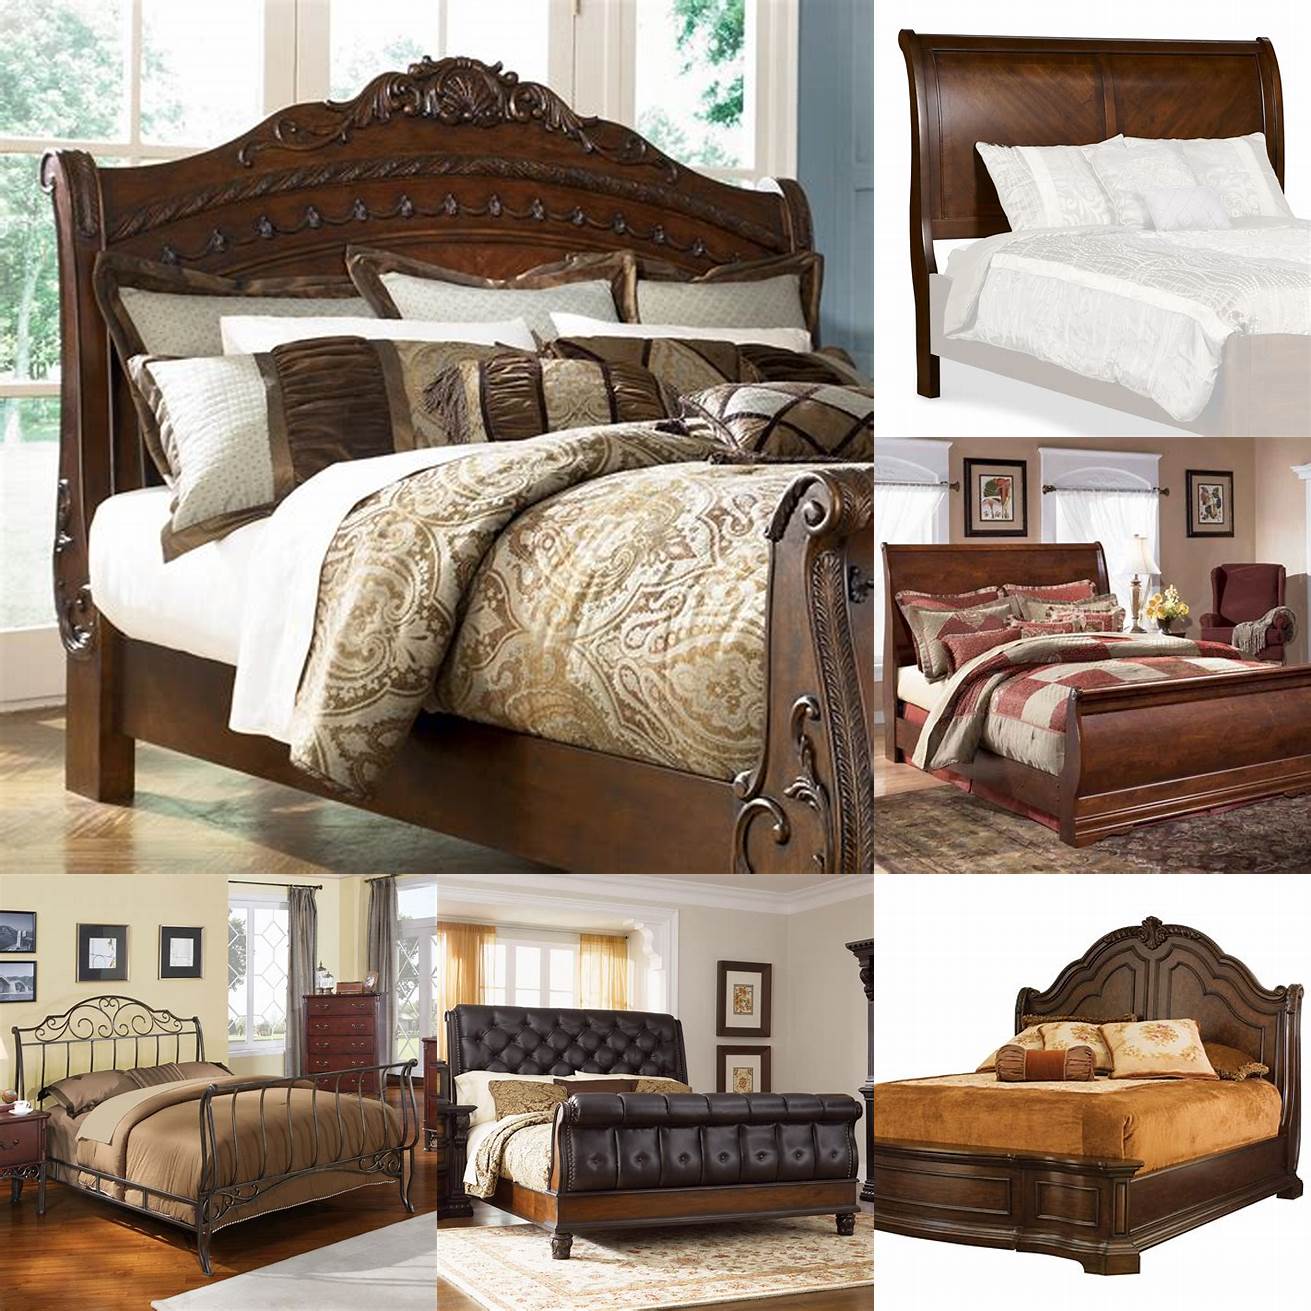 Sleigh bed - features a curved headboard and footboard that resemble a sleigh